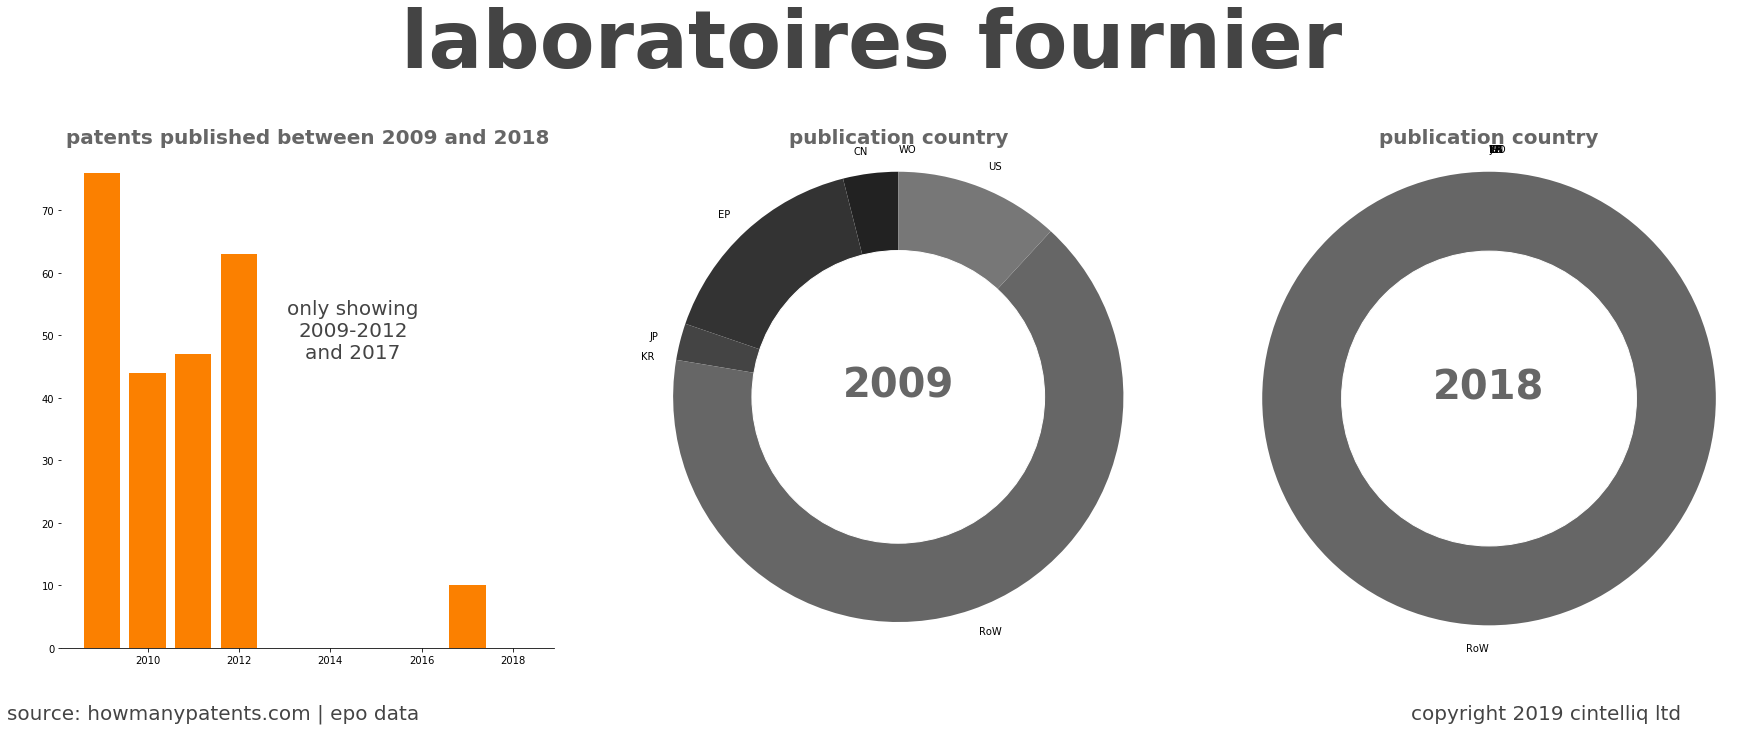 summary of patents for Laboratoires Fournier